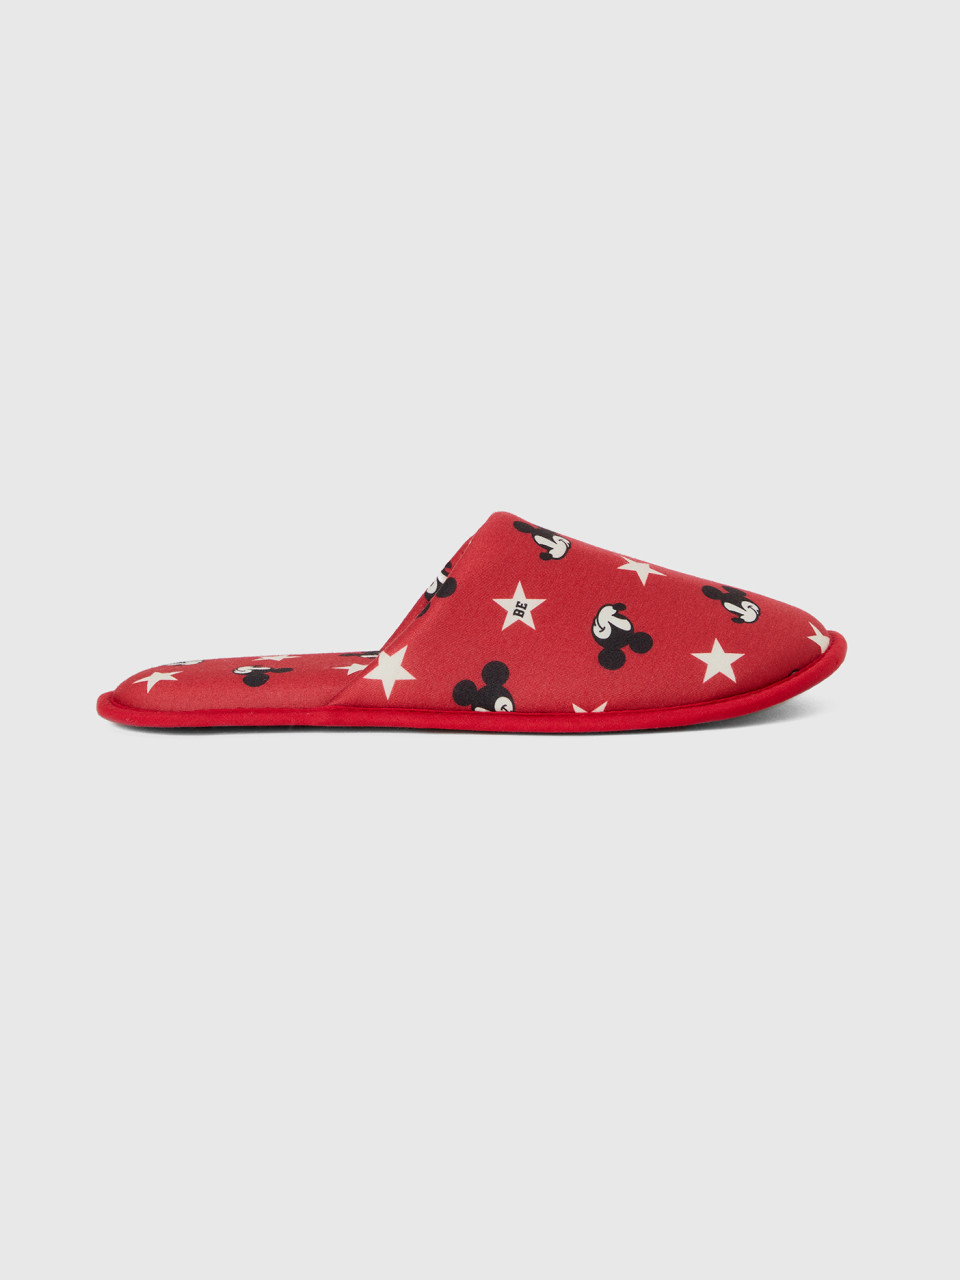 Benetton, Chaussons Mickey Rouges, Rouge, Femme